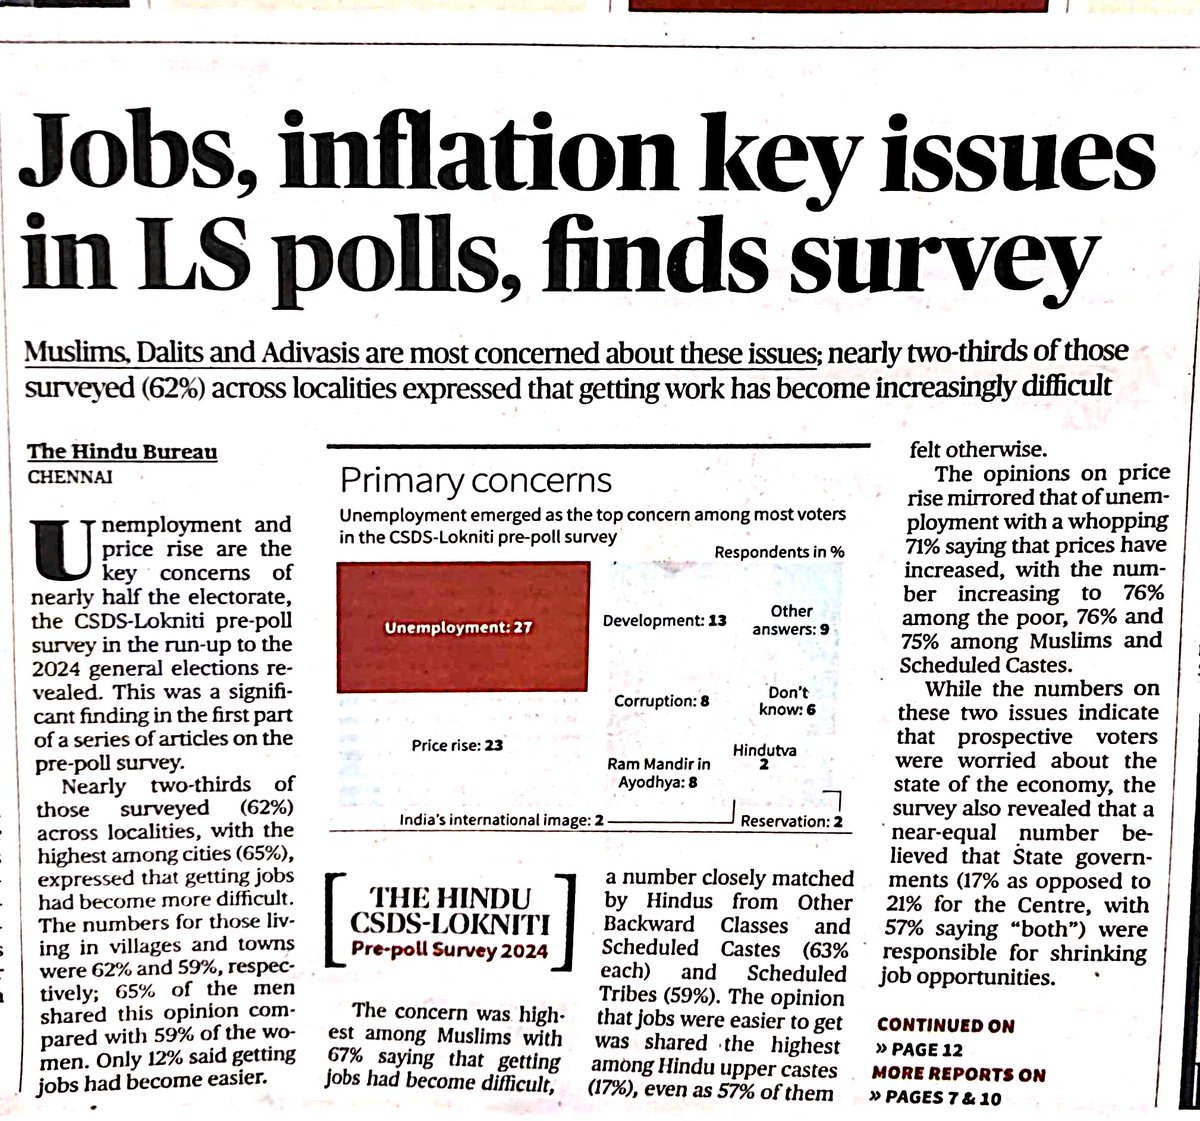 The current government has failed to provide the Jobs and control the market and 140 cores people inflation. #RahulGandhi #RahulGandhiVoiceOfIndia #RahulGandhiHopeOfIndia #INC #Indianallience #Democracy #EVM_हटाओ_बैलेट_पेपर_लाओ #freeandfairelection